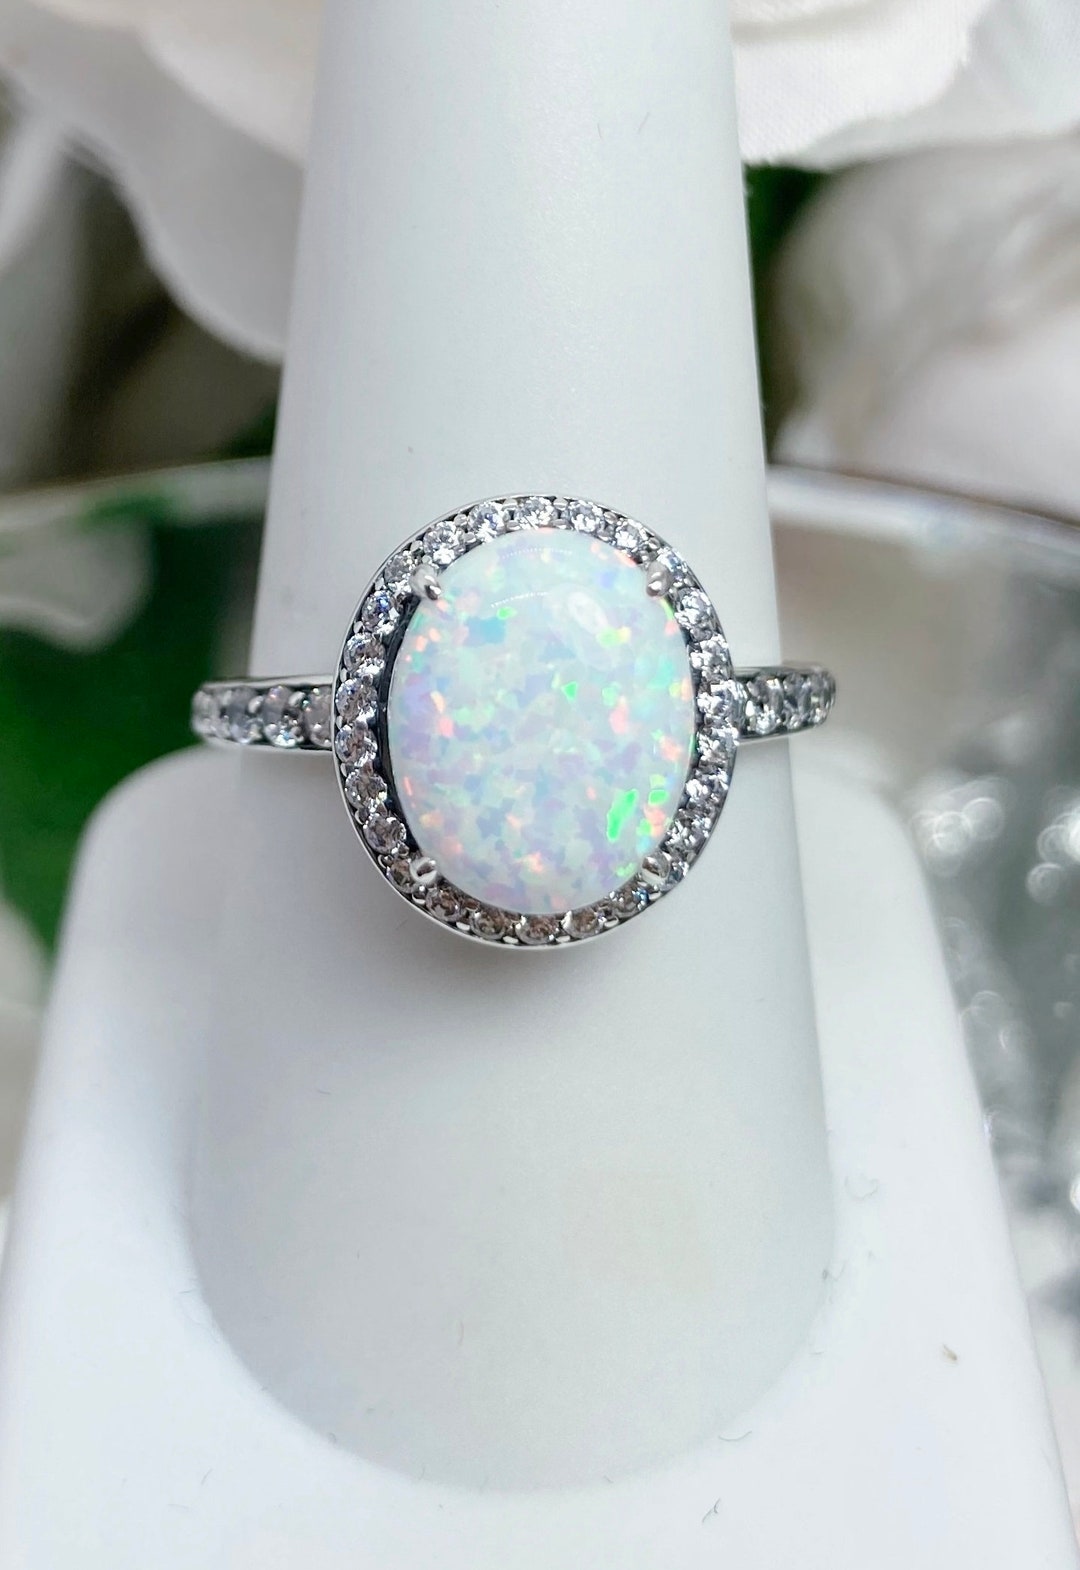 Opal Ring/ Sterling Silver/ 3ct Oval Cut Simulated Opal & White CZ Pavé  Accents Halo Art Deco Filigree custom Made Design228 - Etsy Canada